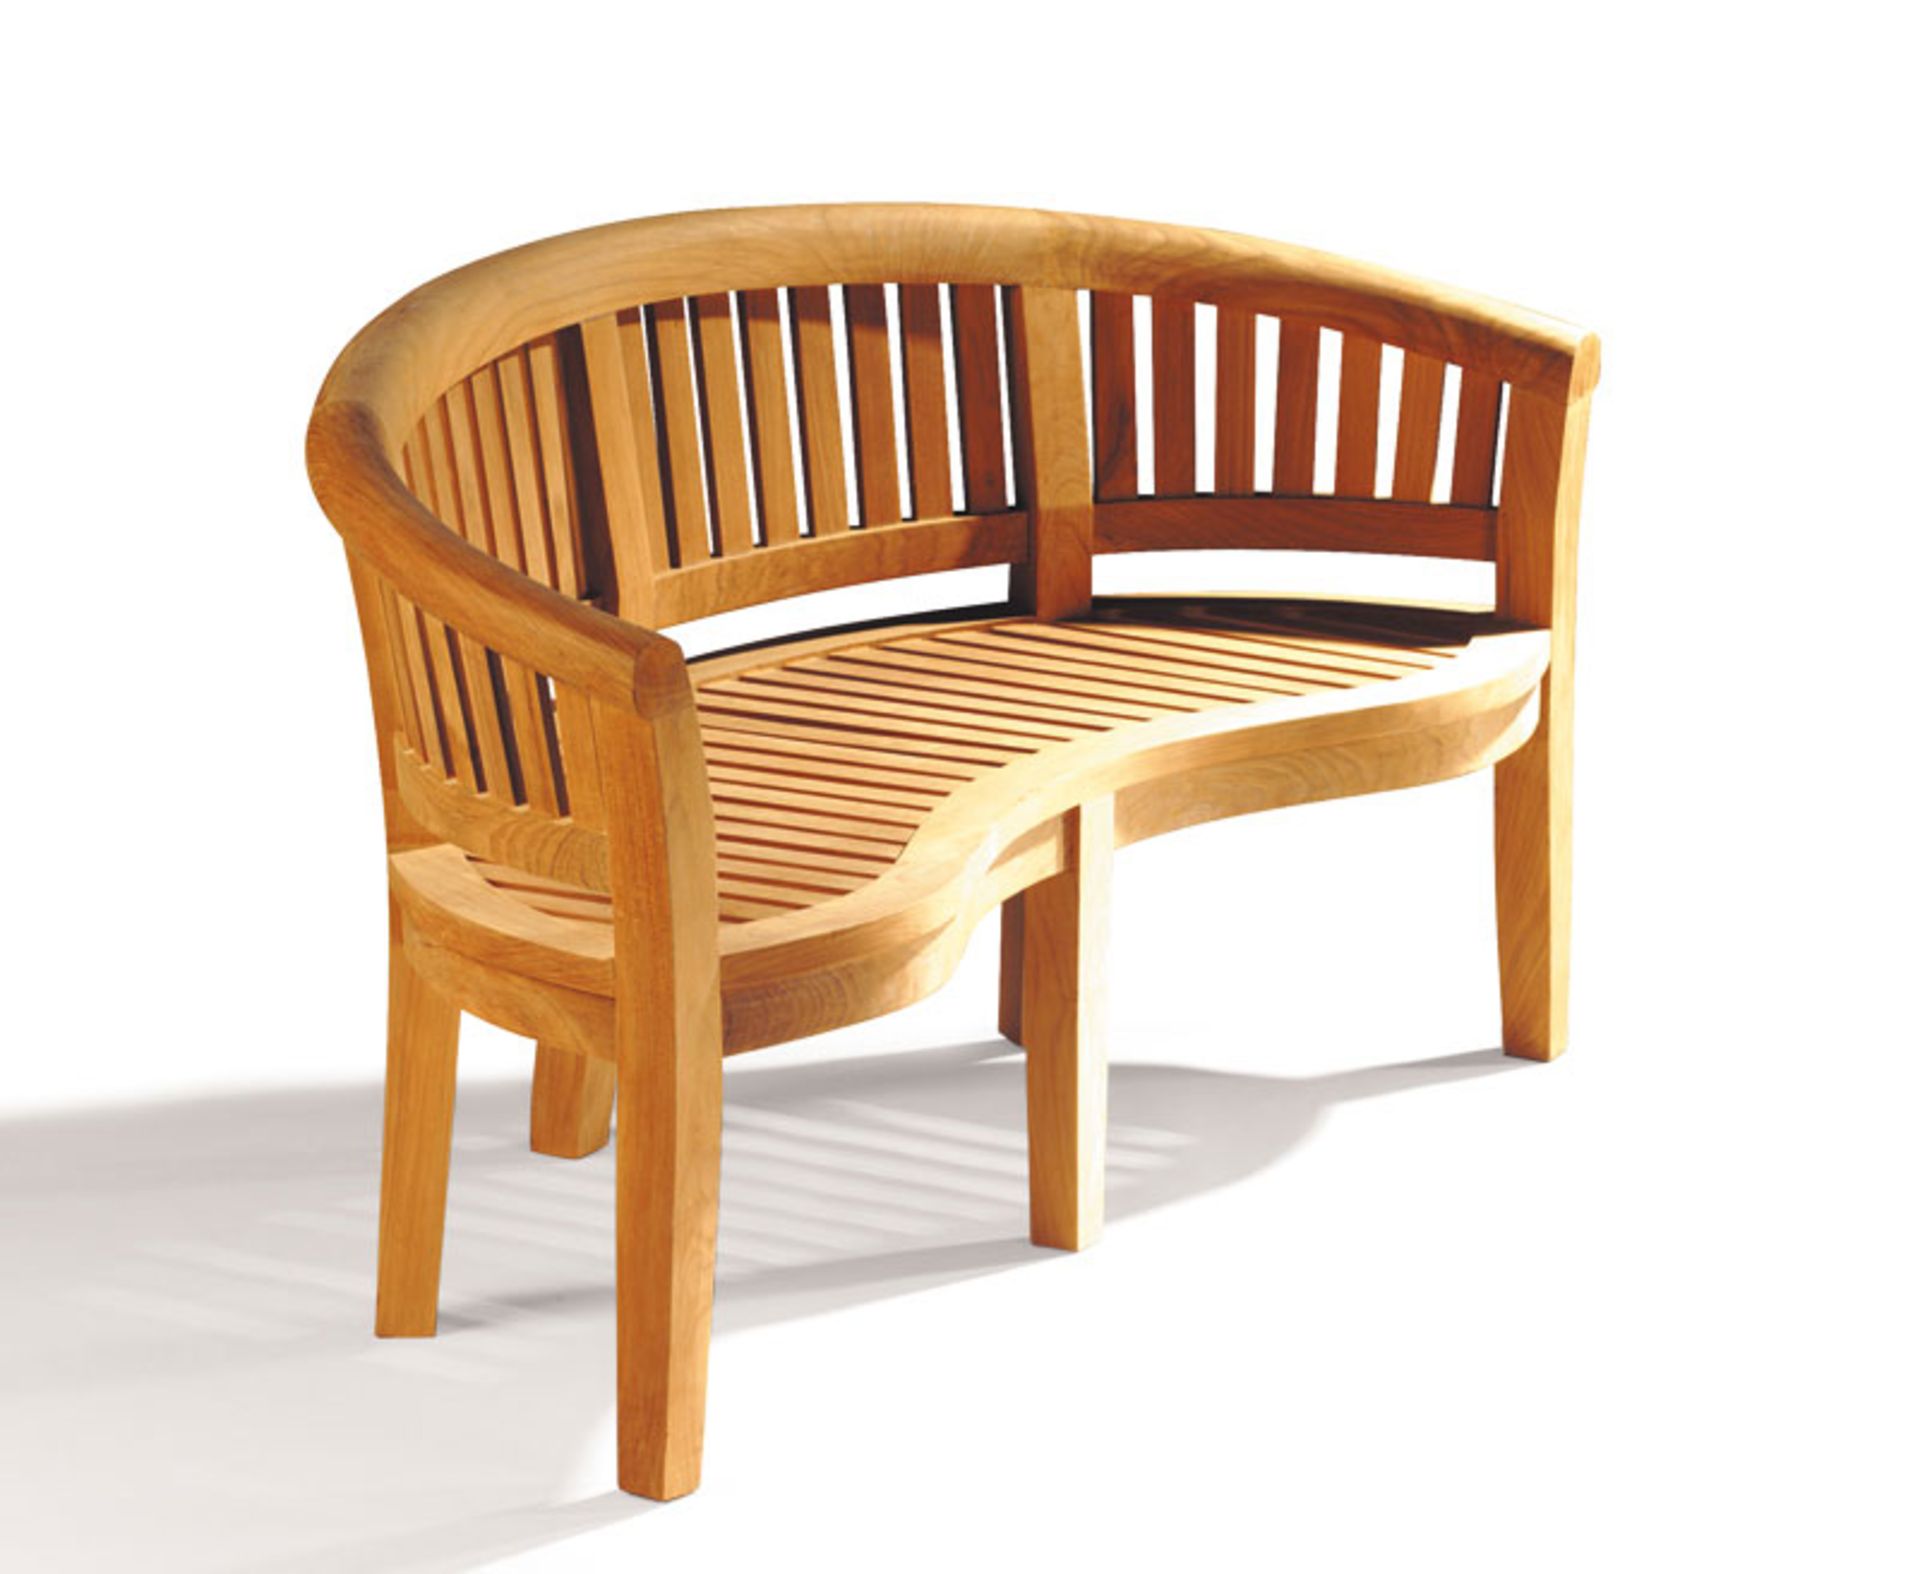 NEW PACKAGED SOLID TEAK PEANUT BENCH - Image 2 of 2